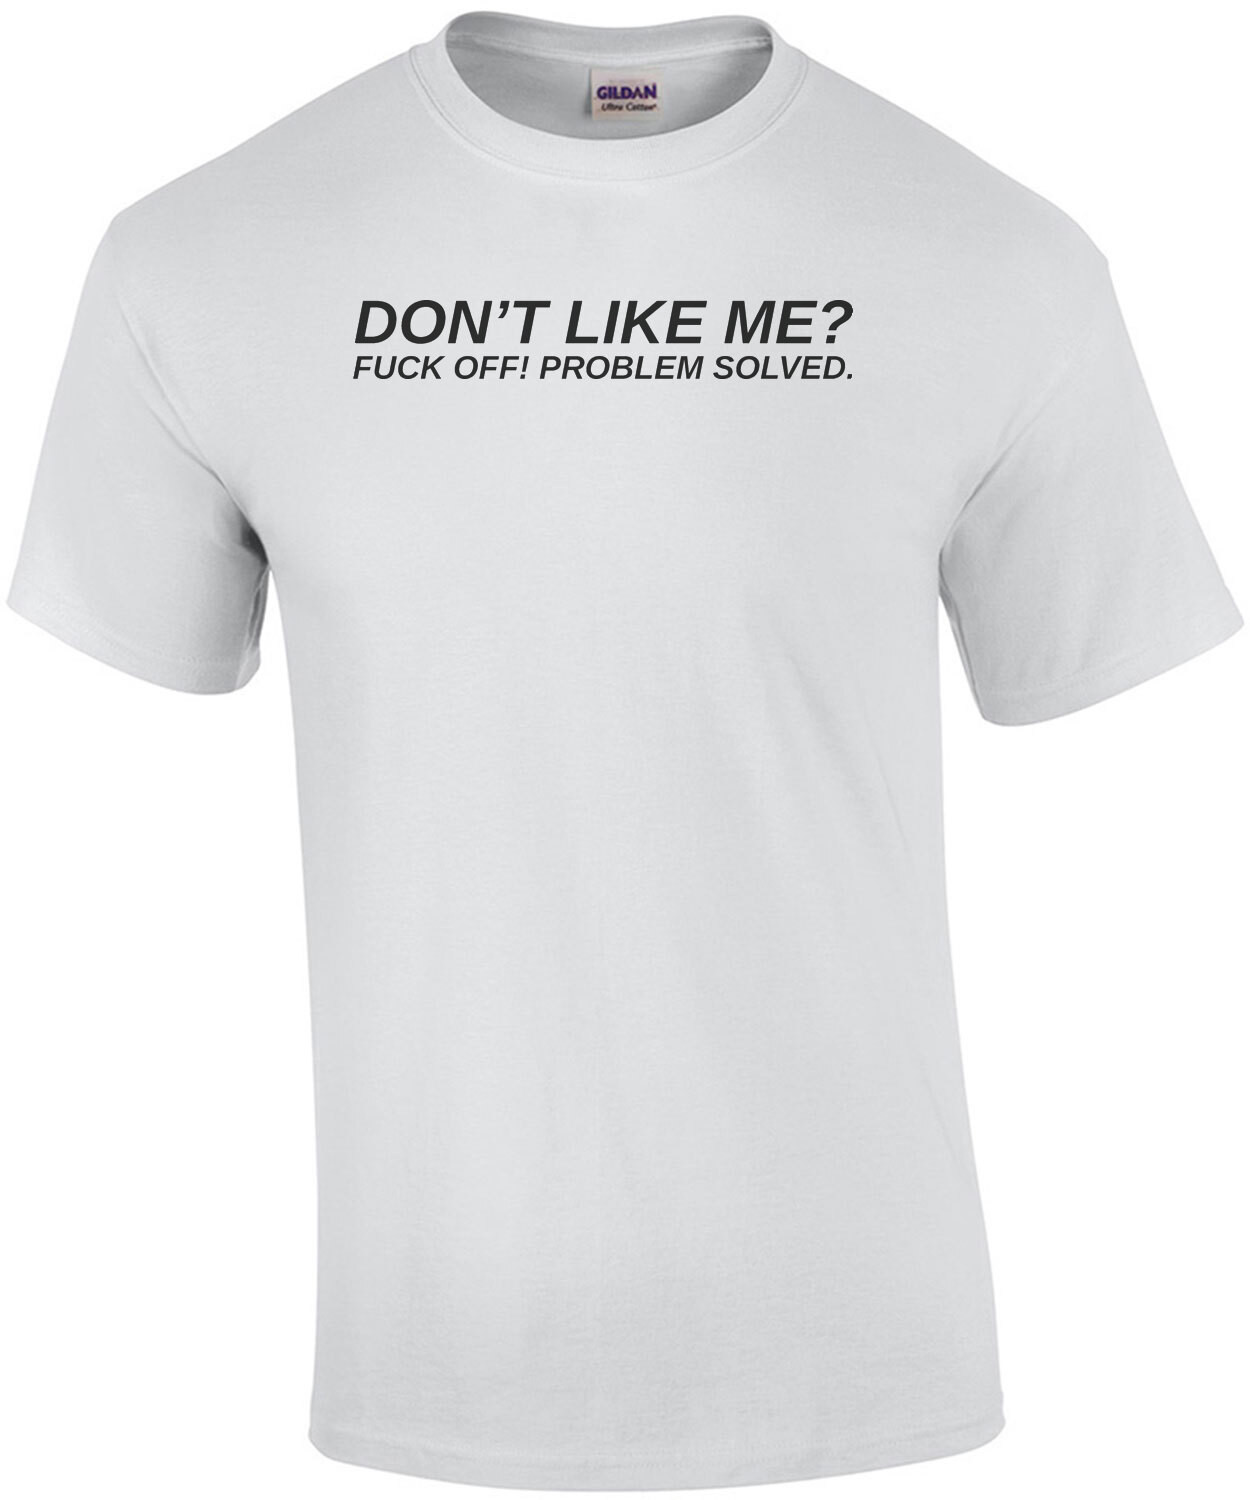 Don't like me? Fuck off! Problem solved. rude t-shirt